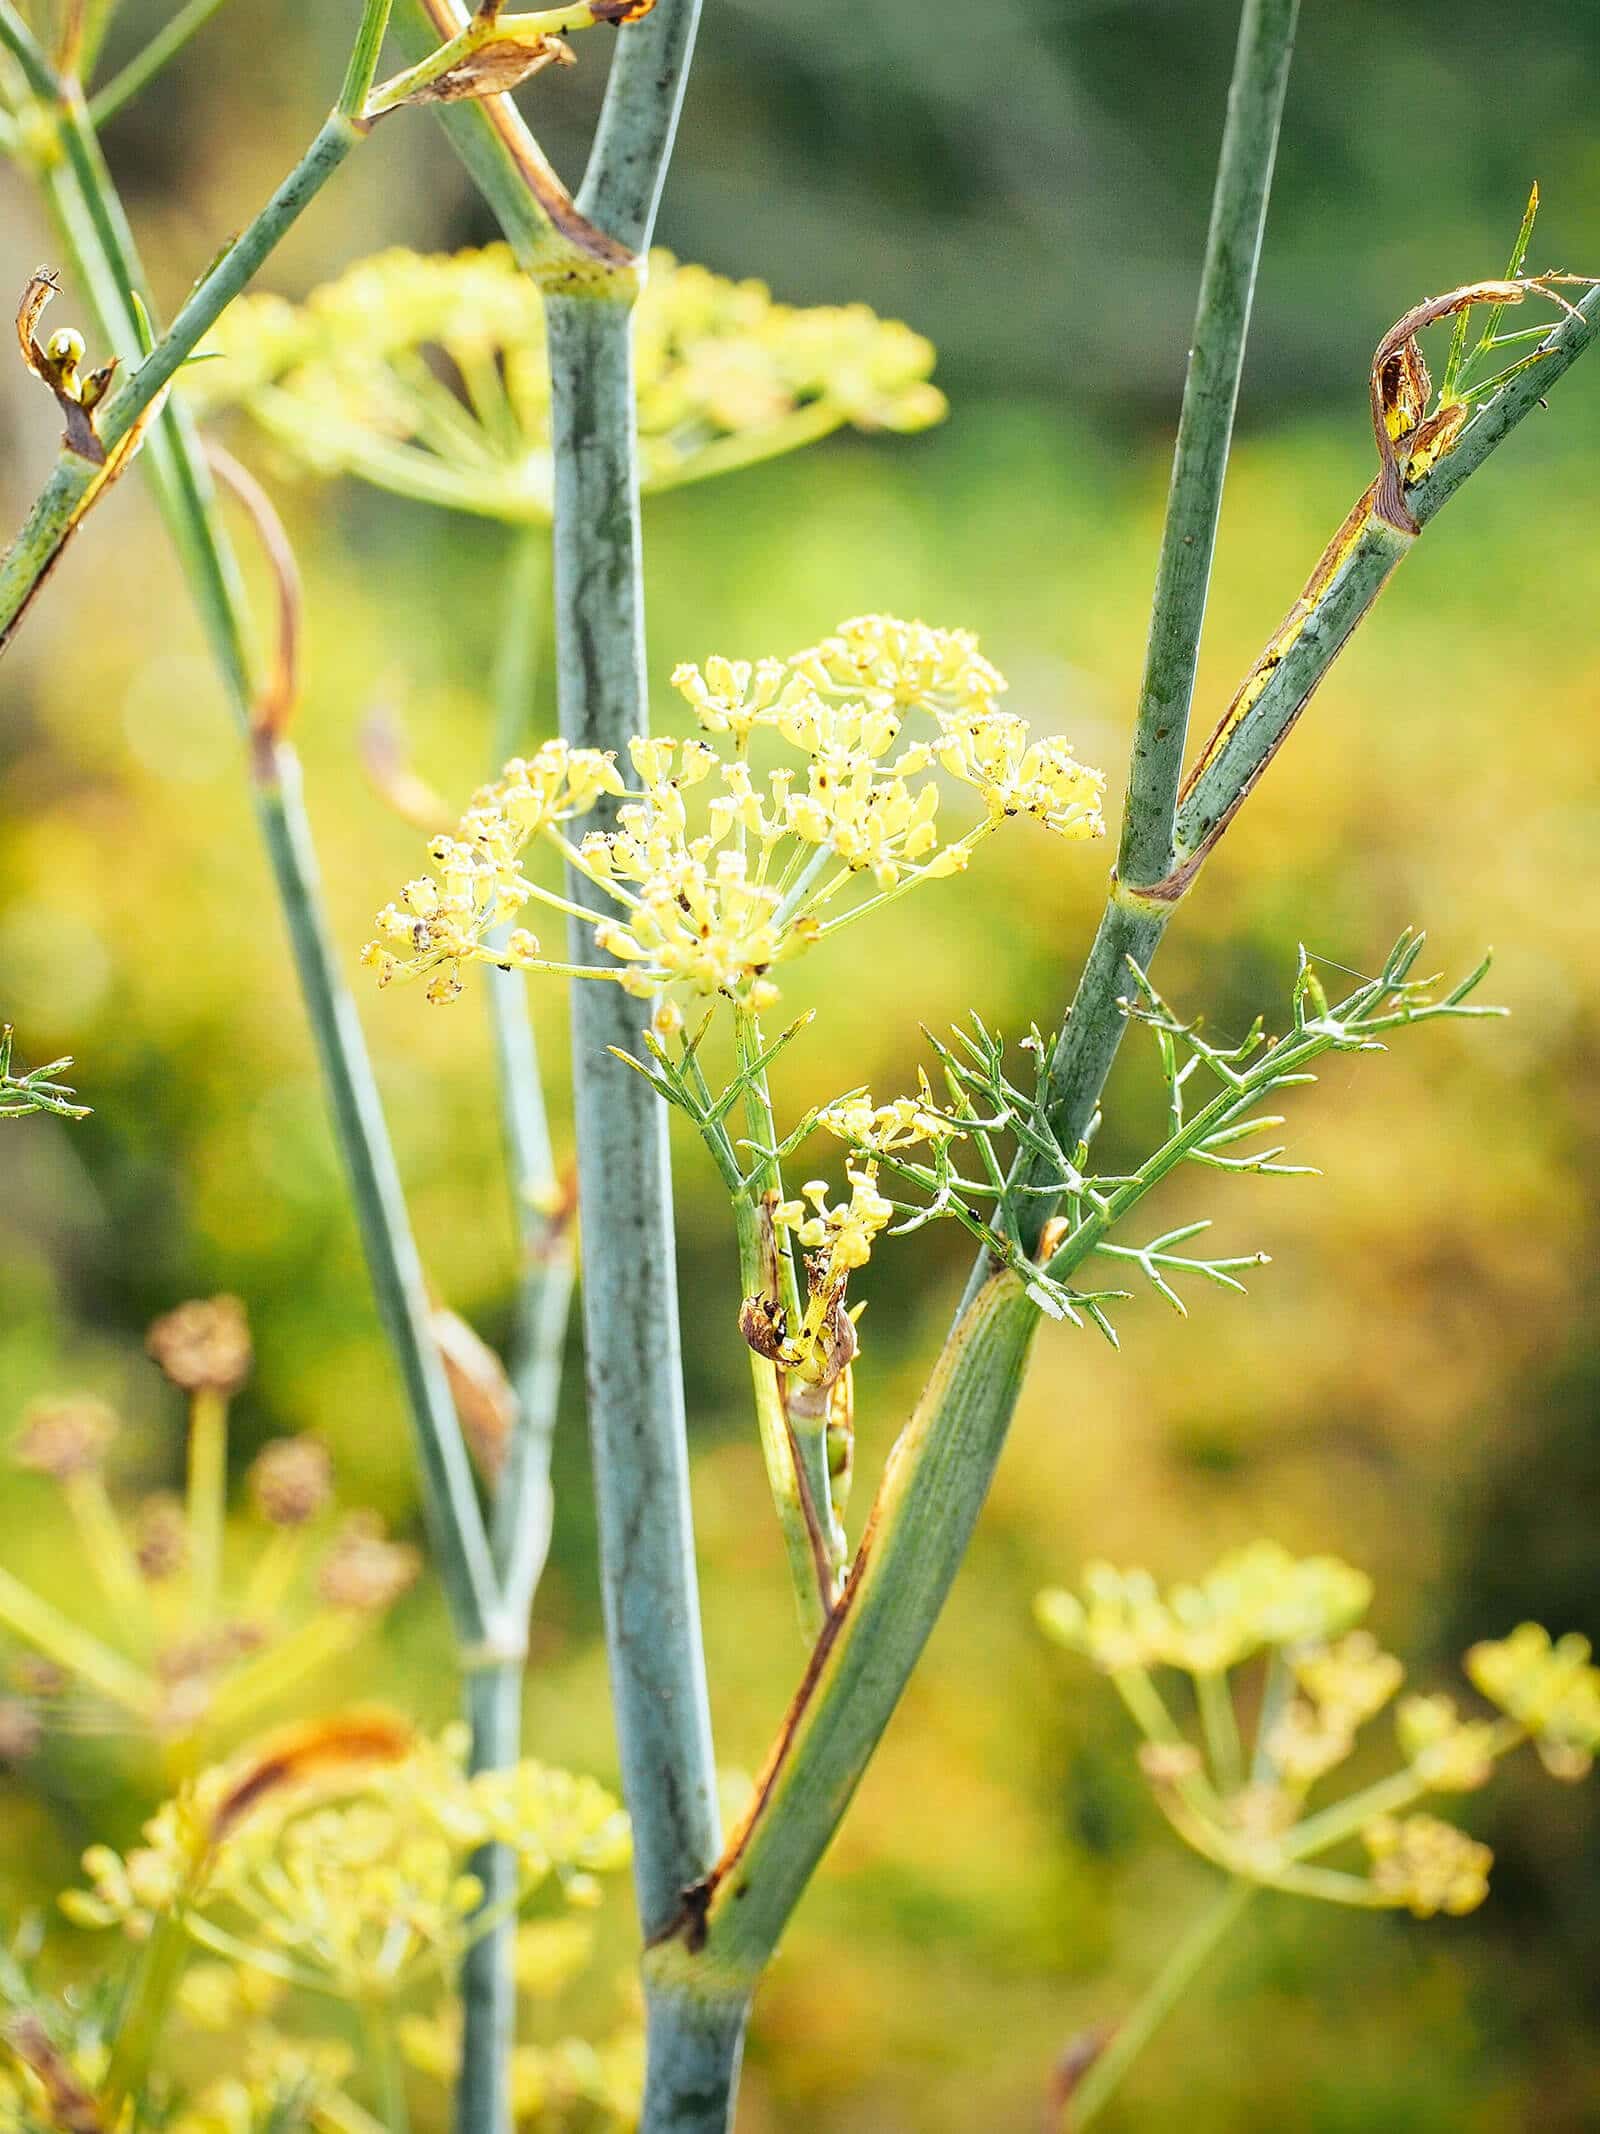 Fennel stalk and fennel flowers